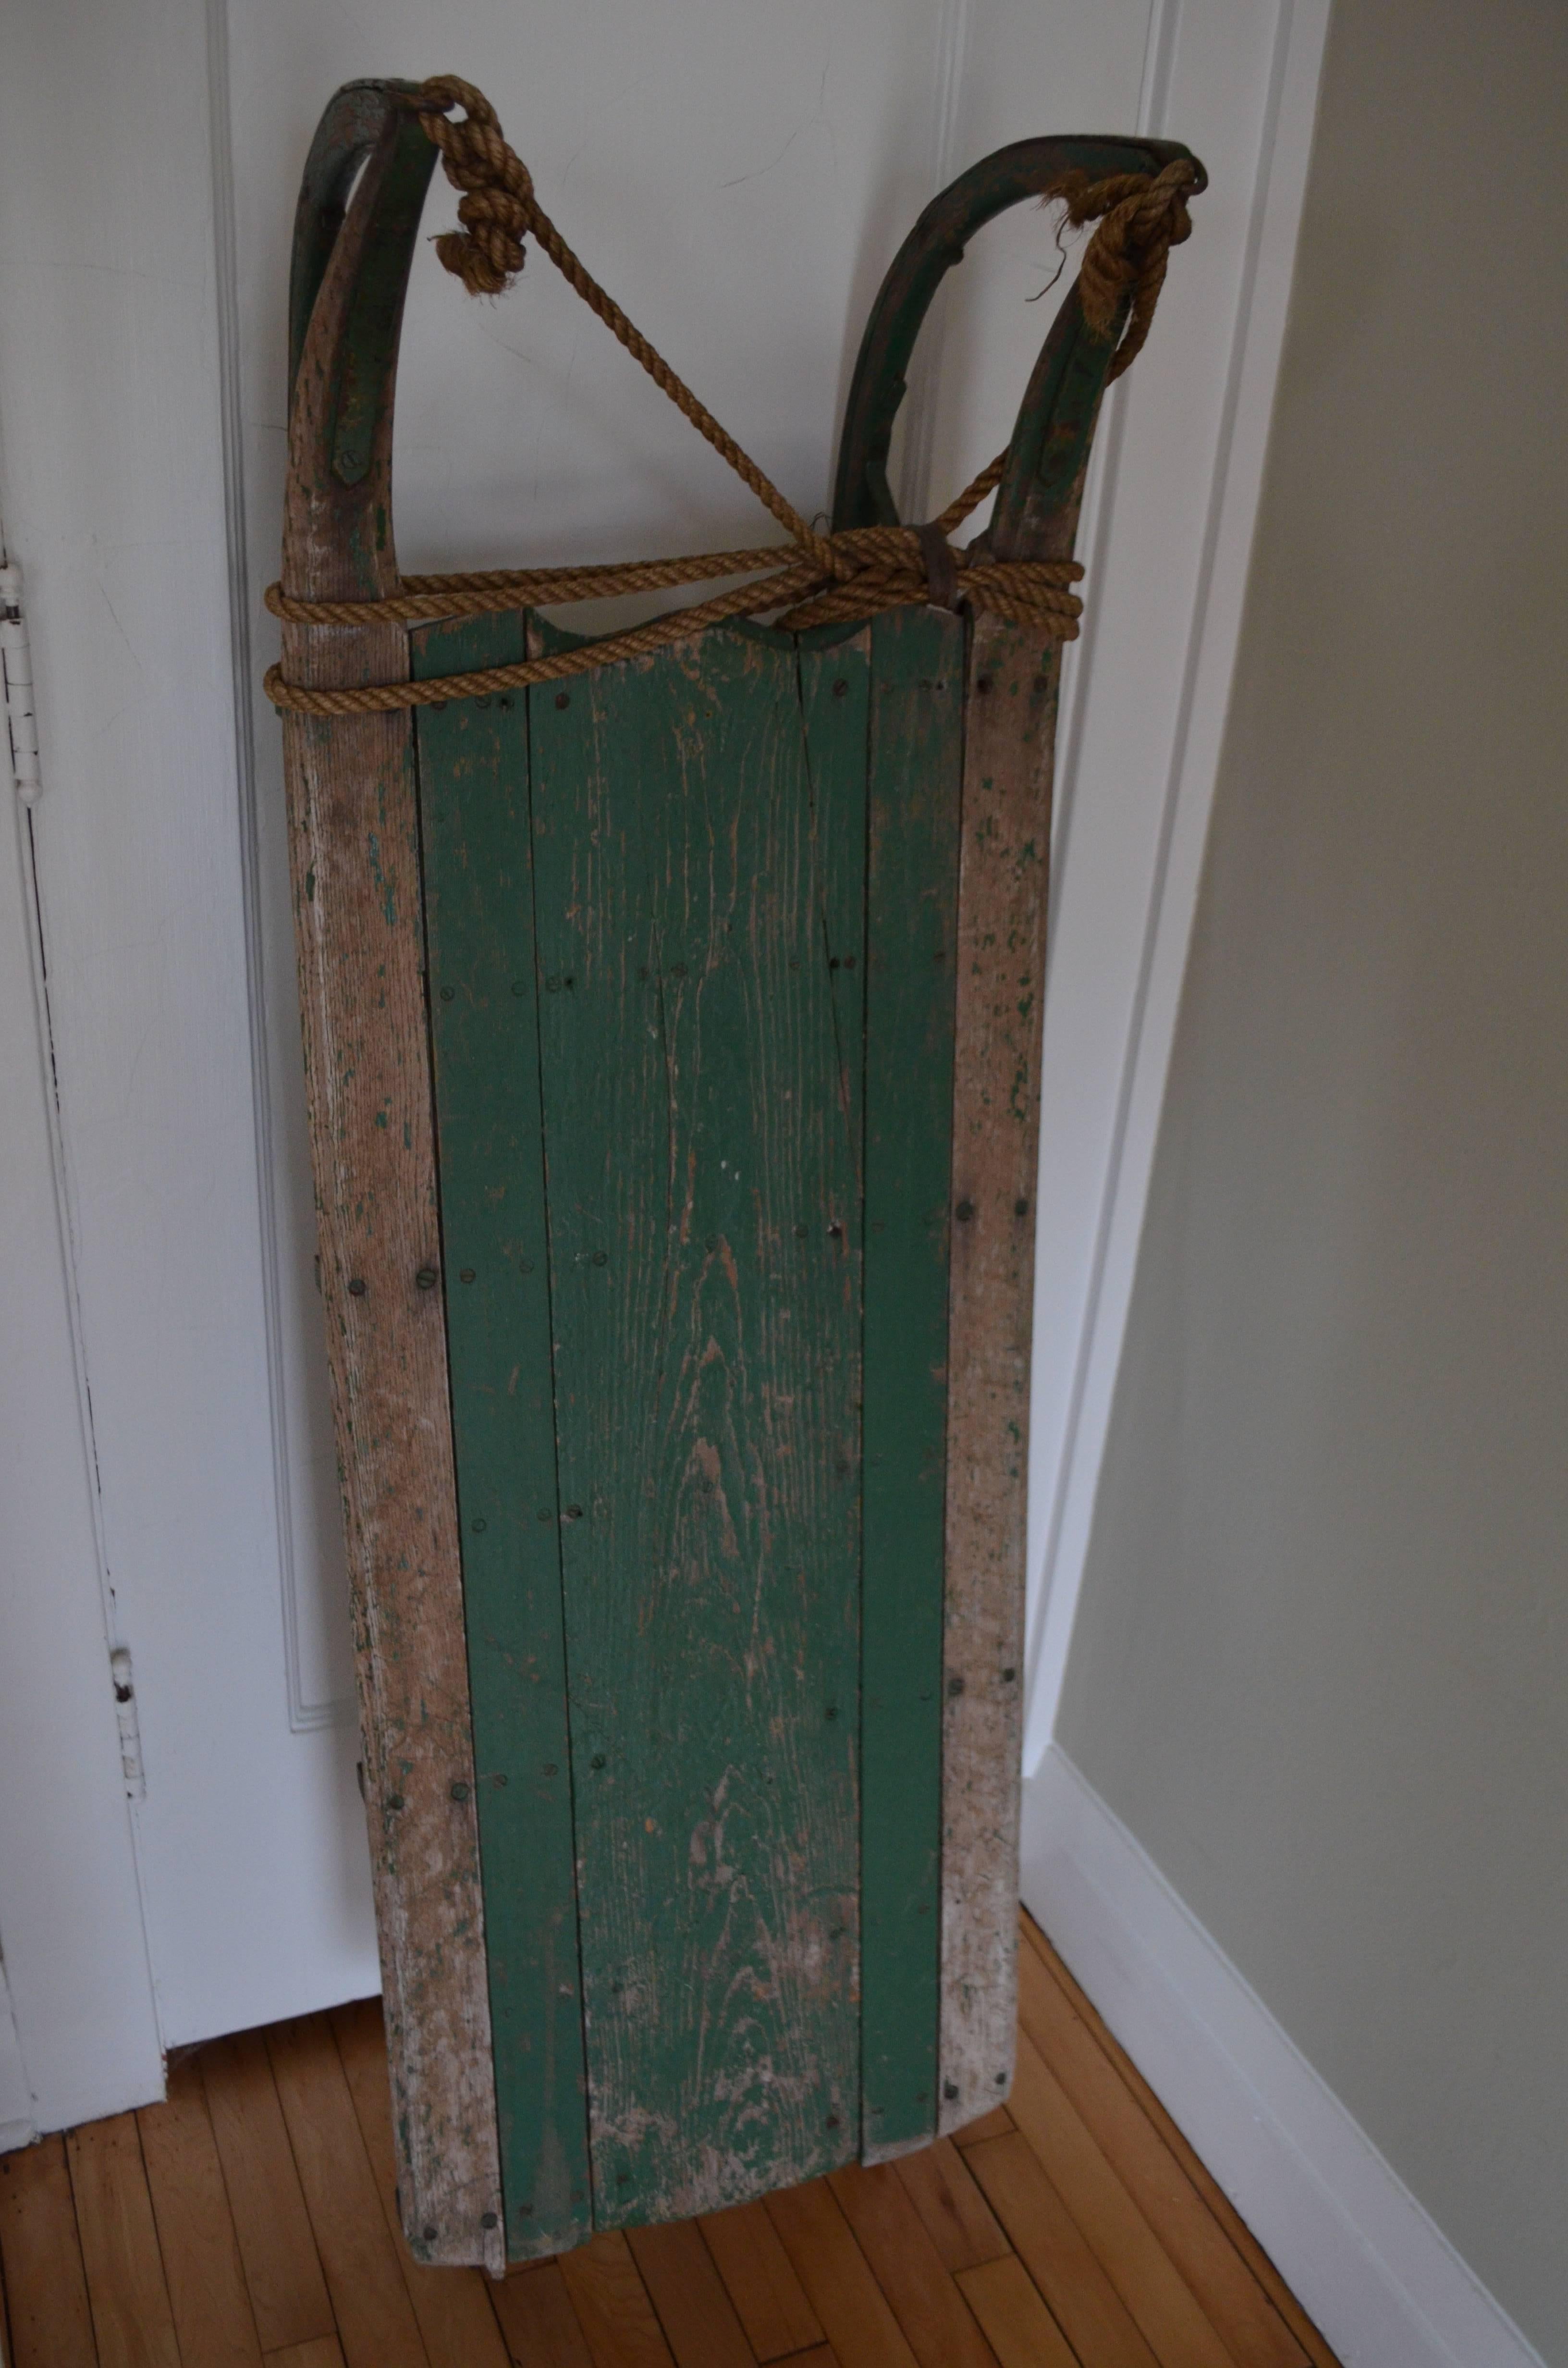 Sled from Maine handcrafted in the style of Folk Art. What that means to us is that when its snow sledding days are over, you've got a handmade artifact of beautifully worn wood, paint and metal for wall display in home, child's room, your ski lodge.